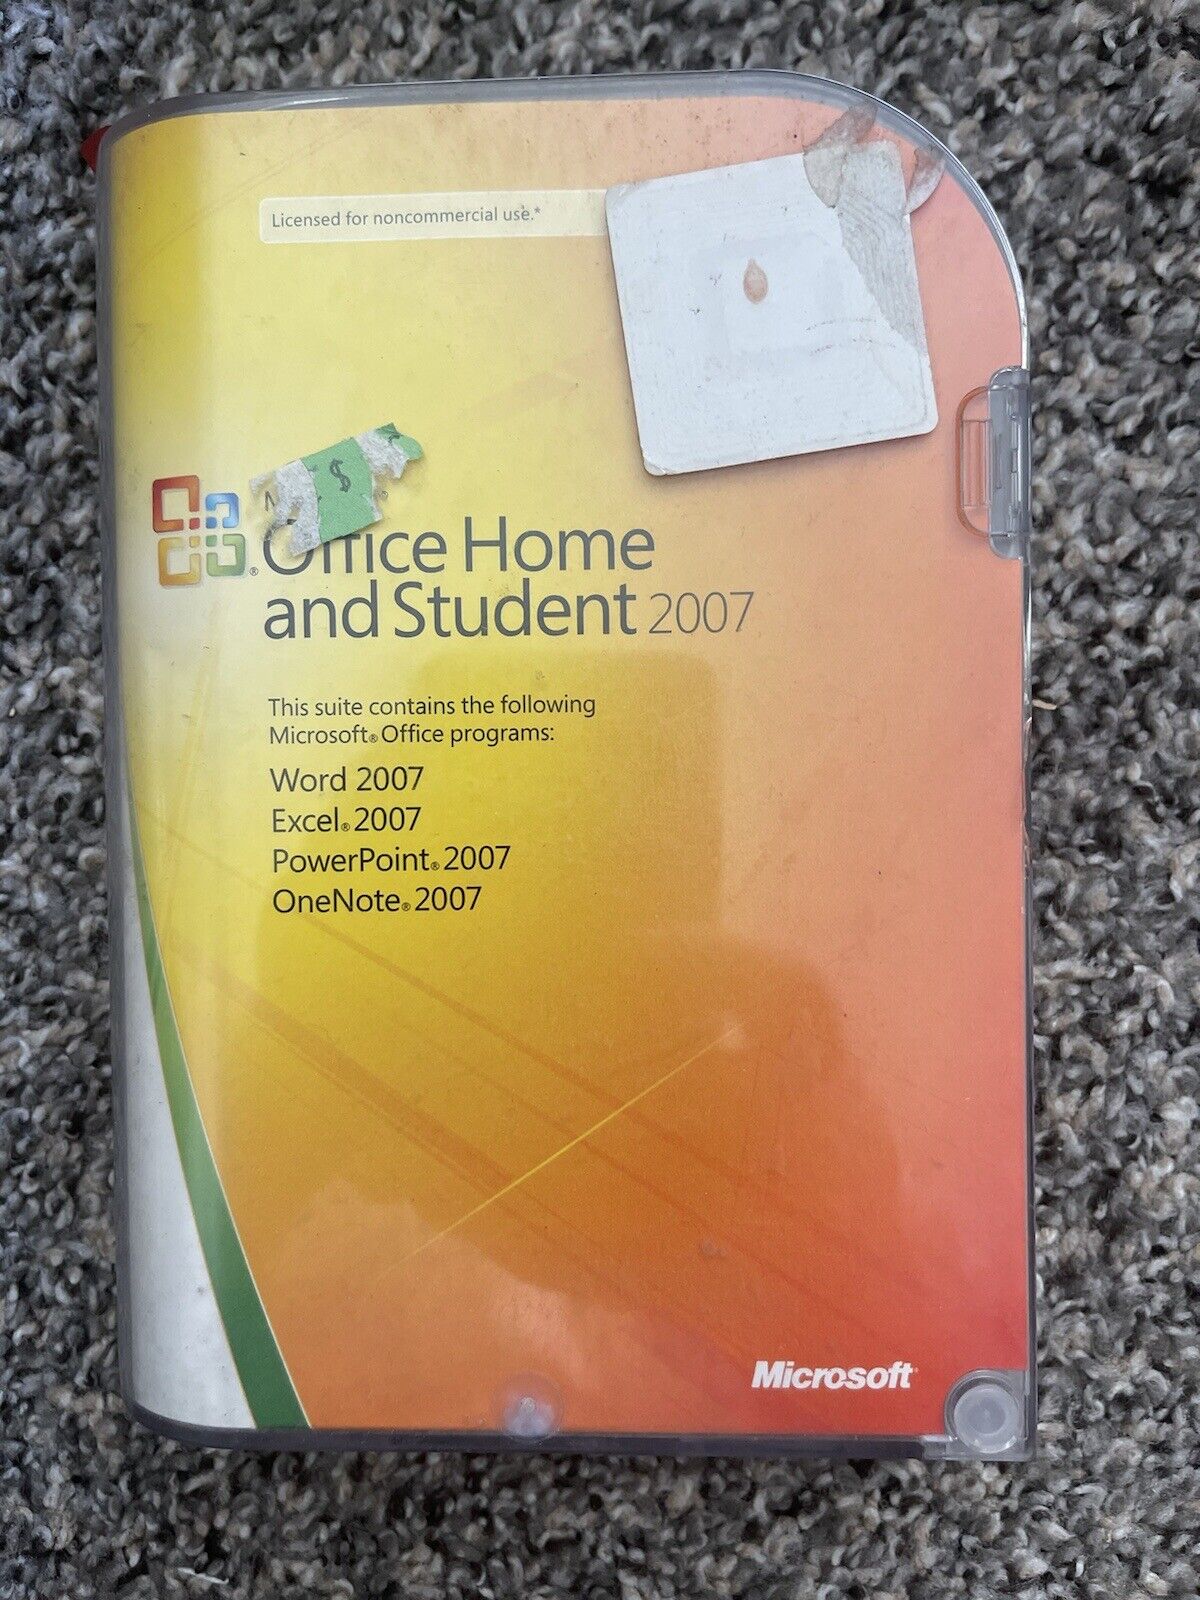 Microsoft Office Home and Student 2007 w/ Product Key, Genuine Retail, TESTED